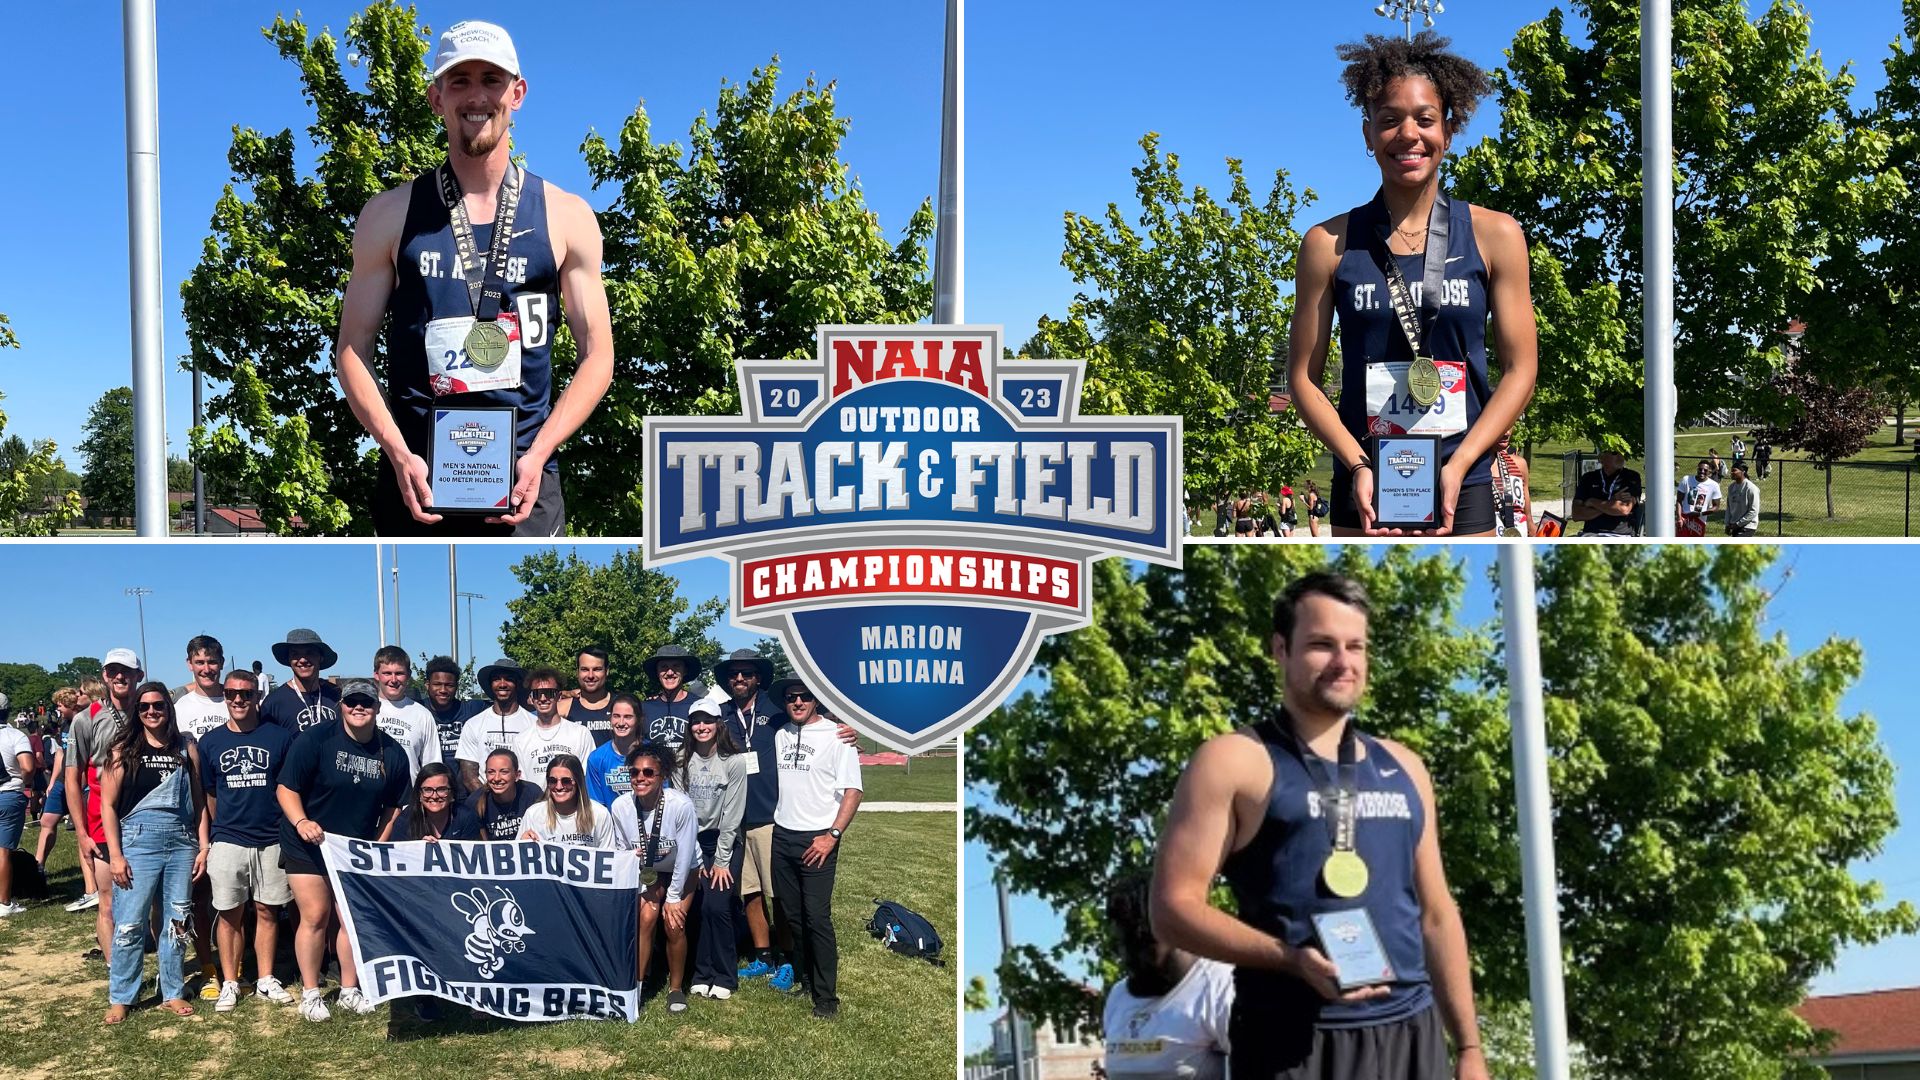 National Champion, three All-Americans and school record set at Outdoor Championships